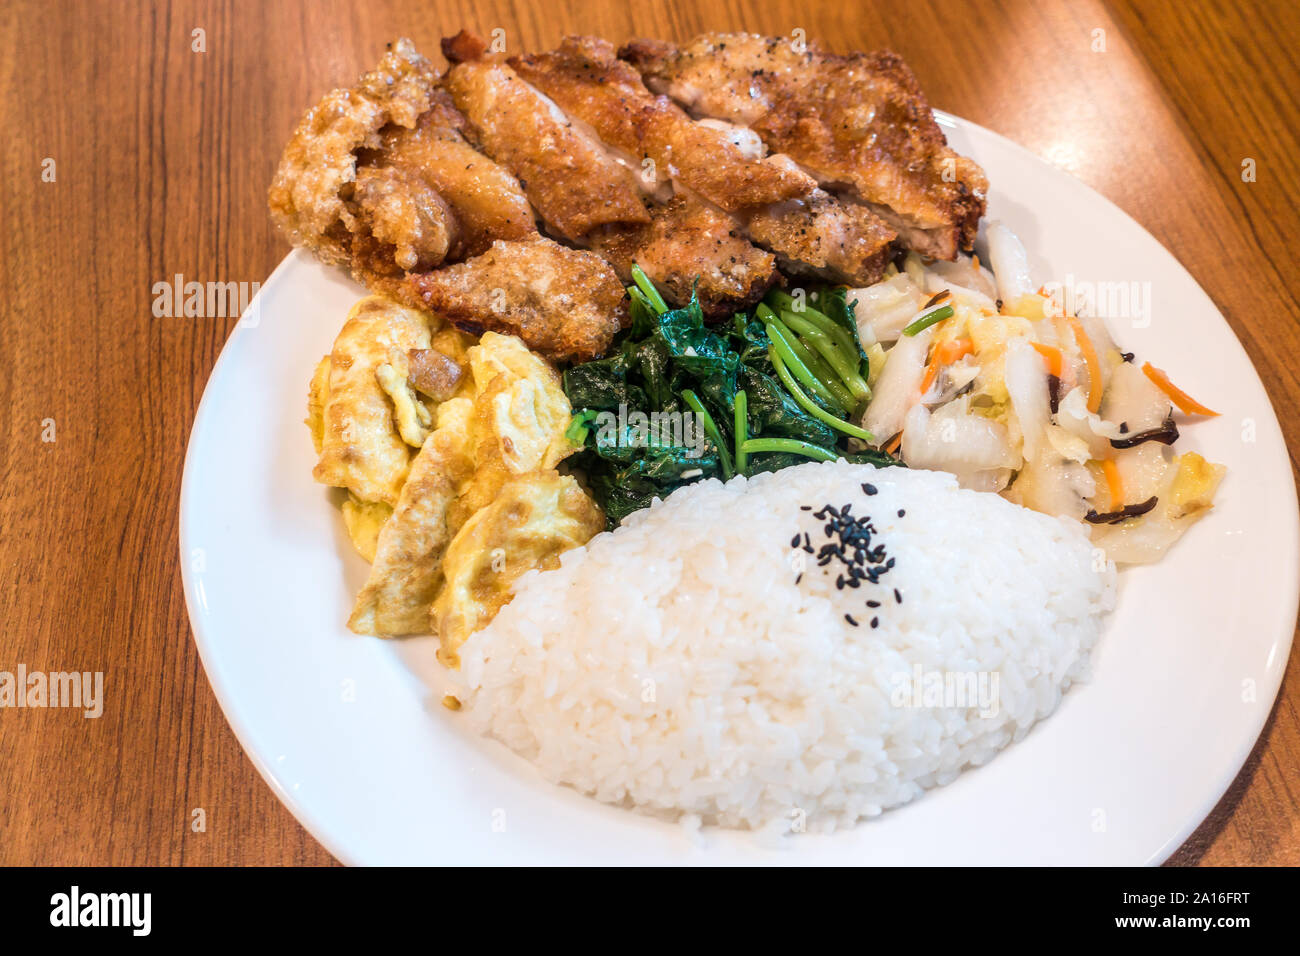 Taiwanese food gourmet fried chicken with rice , bento/boxed meal in wood background Stock Photo